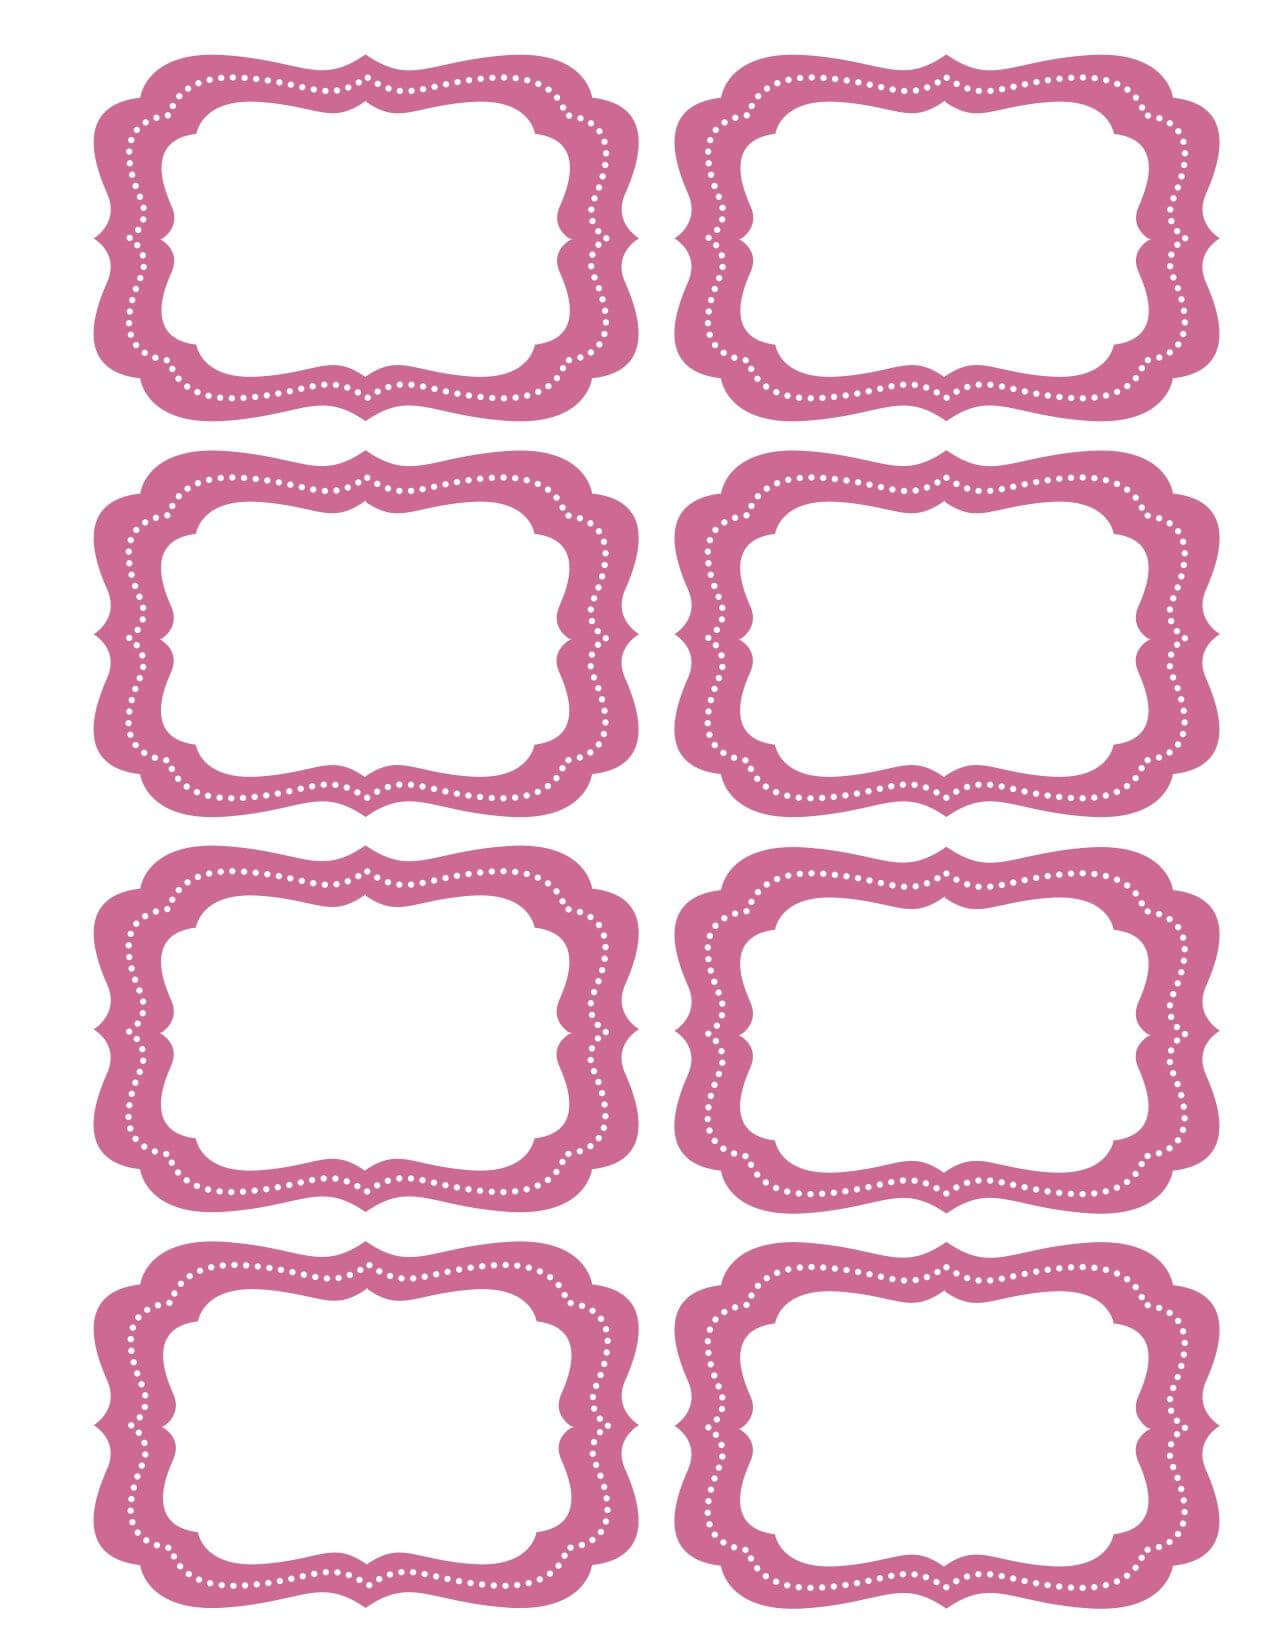 Free Printable Bag Label Templates | Candy Labels Blank Within Blank Luggage Tag Template